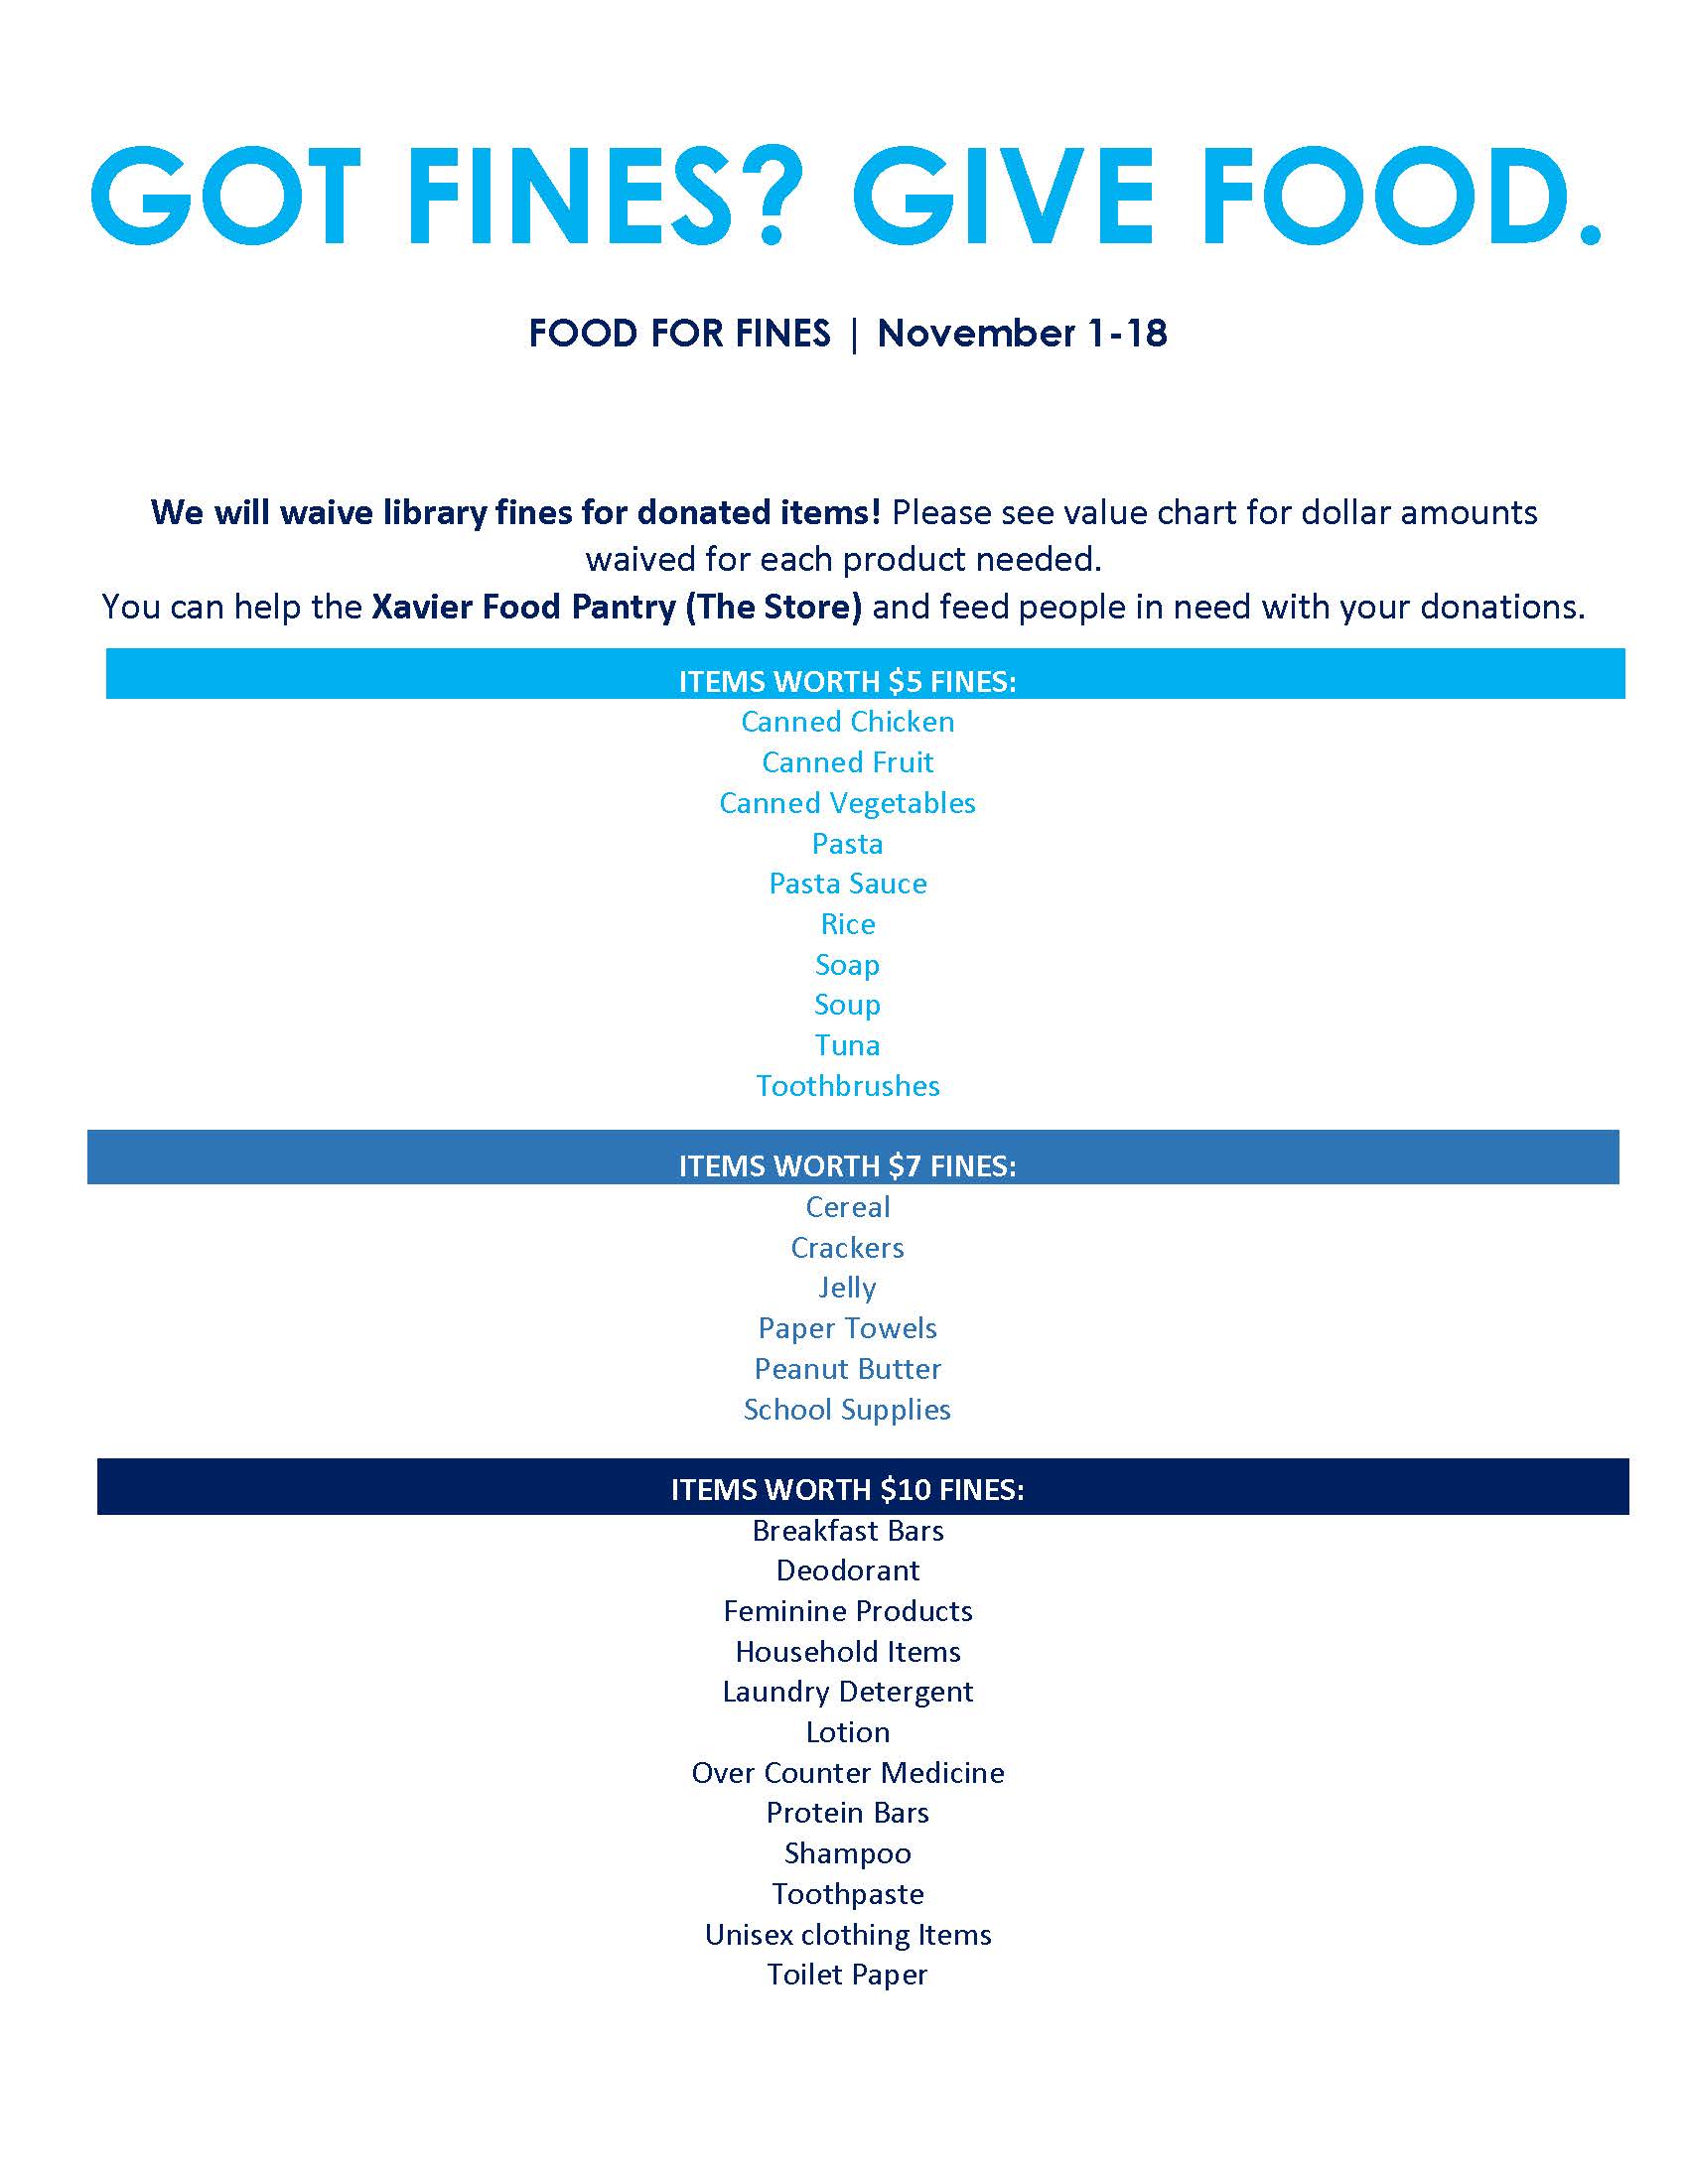 Food For Fines Autumn 2022, call 513-745-4896 for complete values list.